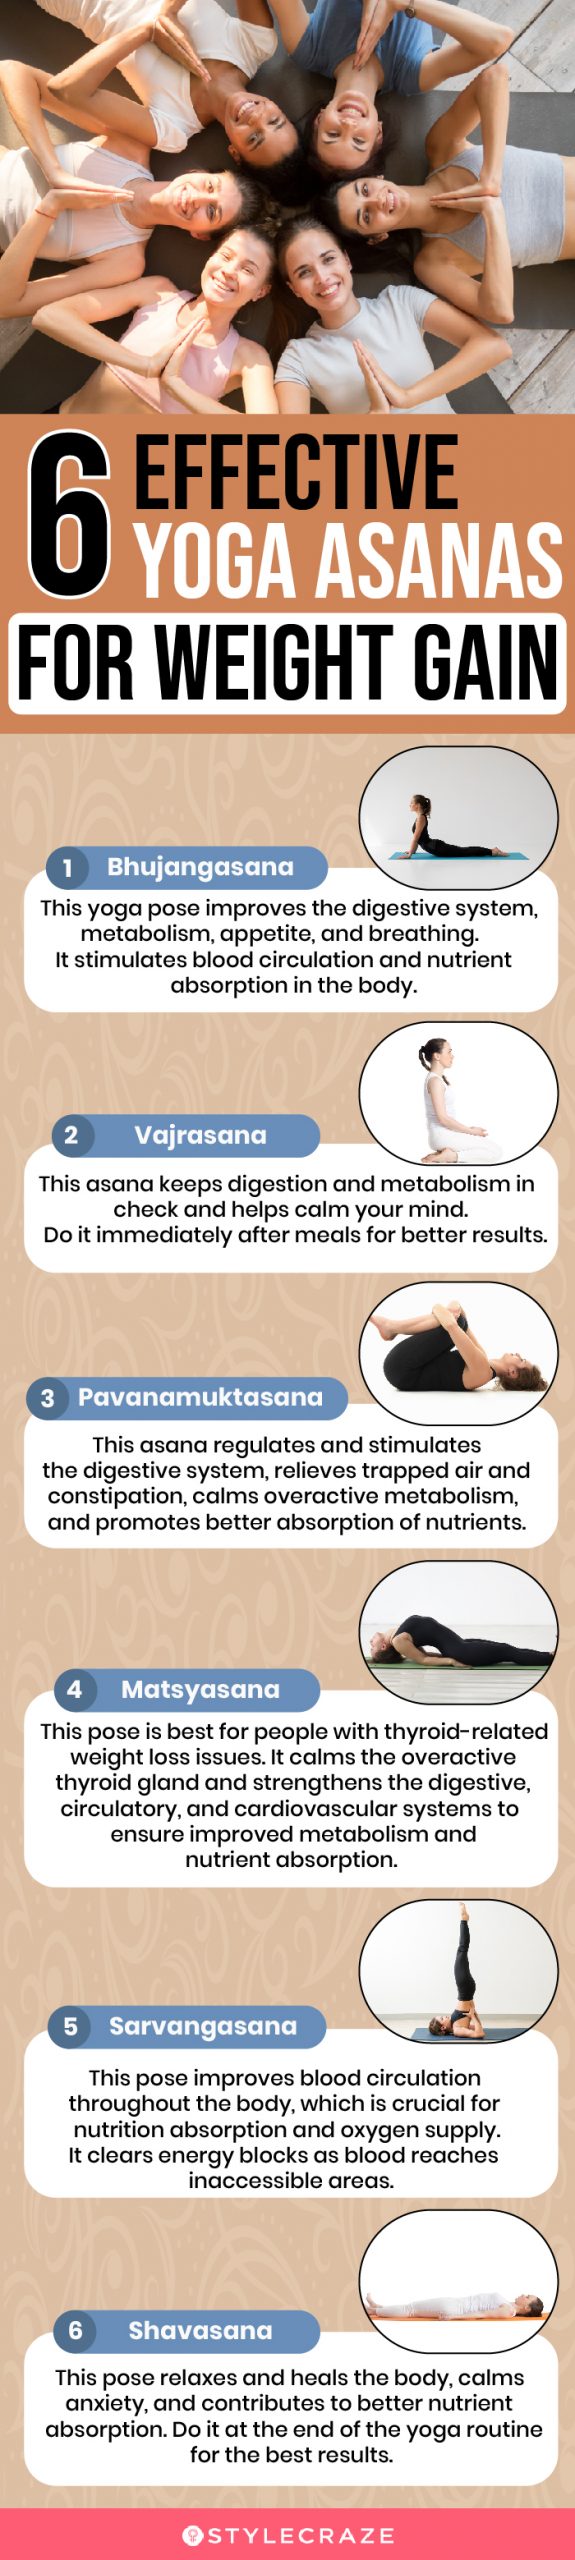 6 effective yoga asanas for weight gain(infographic)